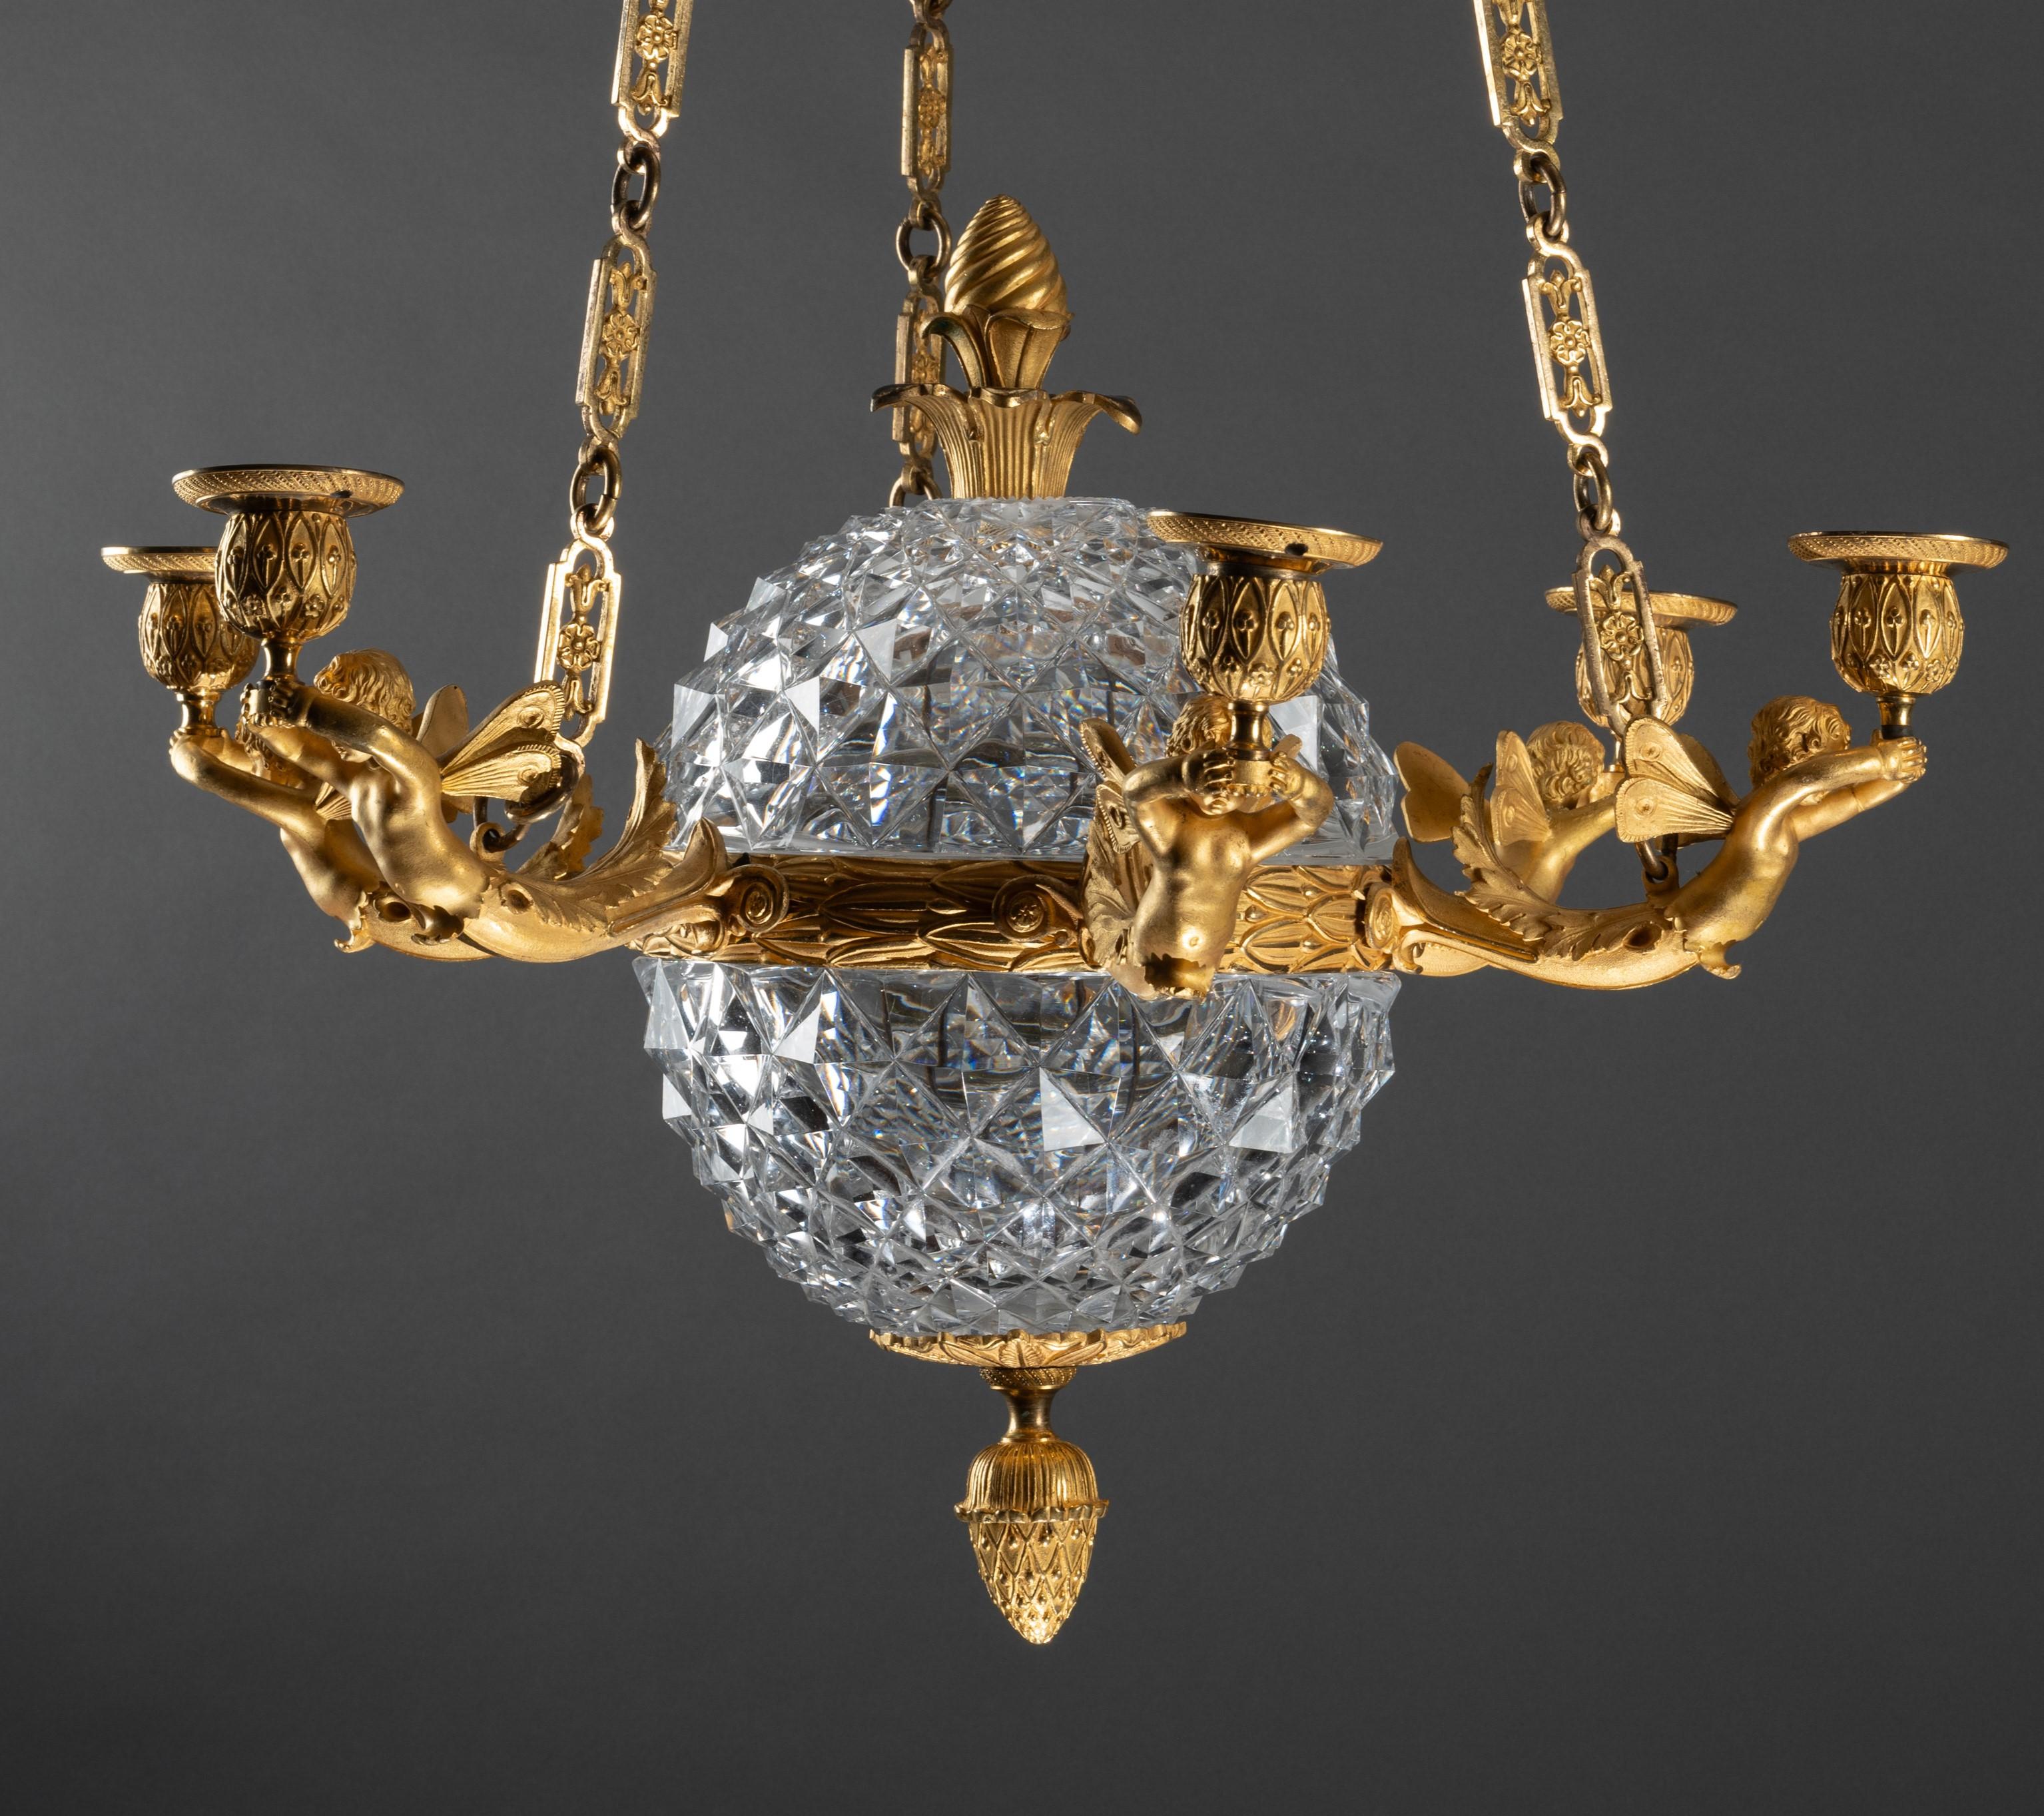 An Empire c. 1810 gilt bronze and crystal chandelier attributed to Ravrio, Paris 2